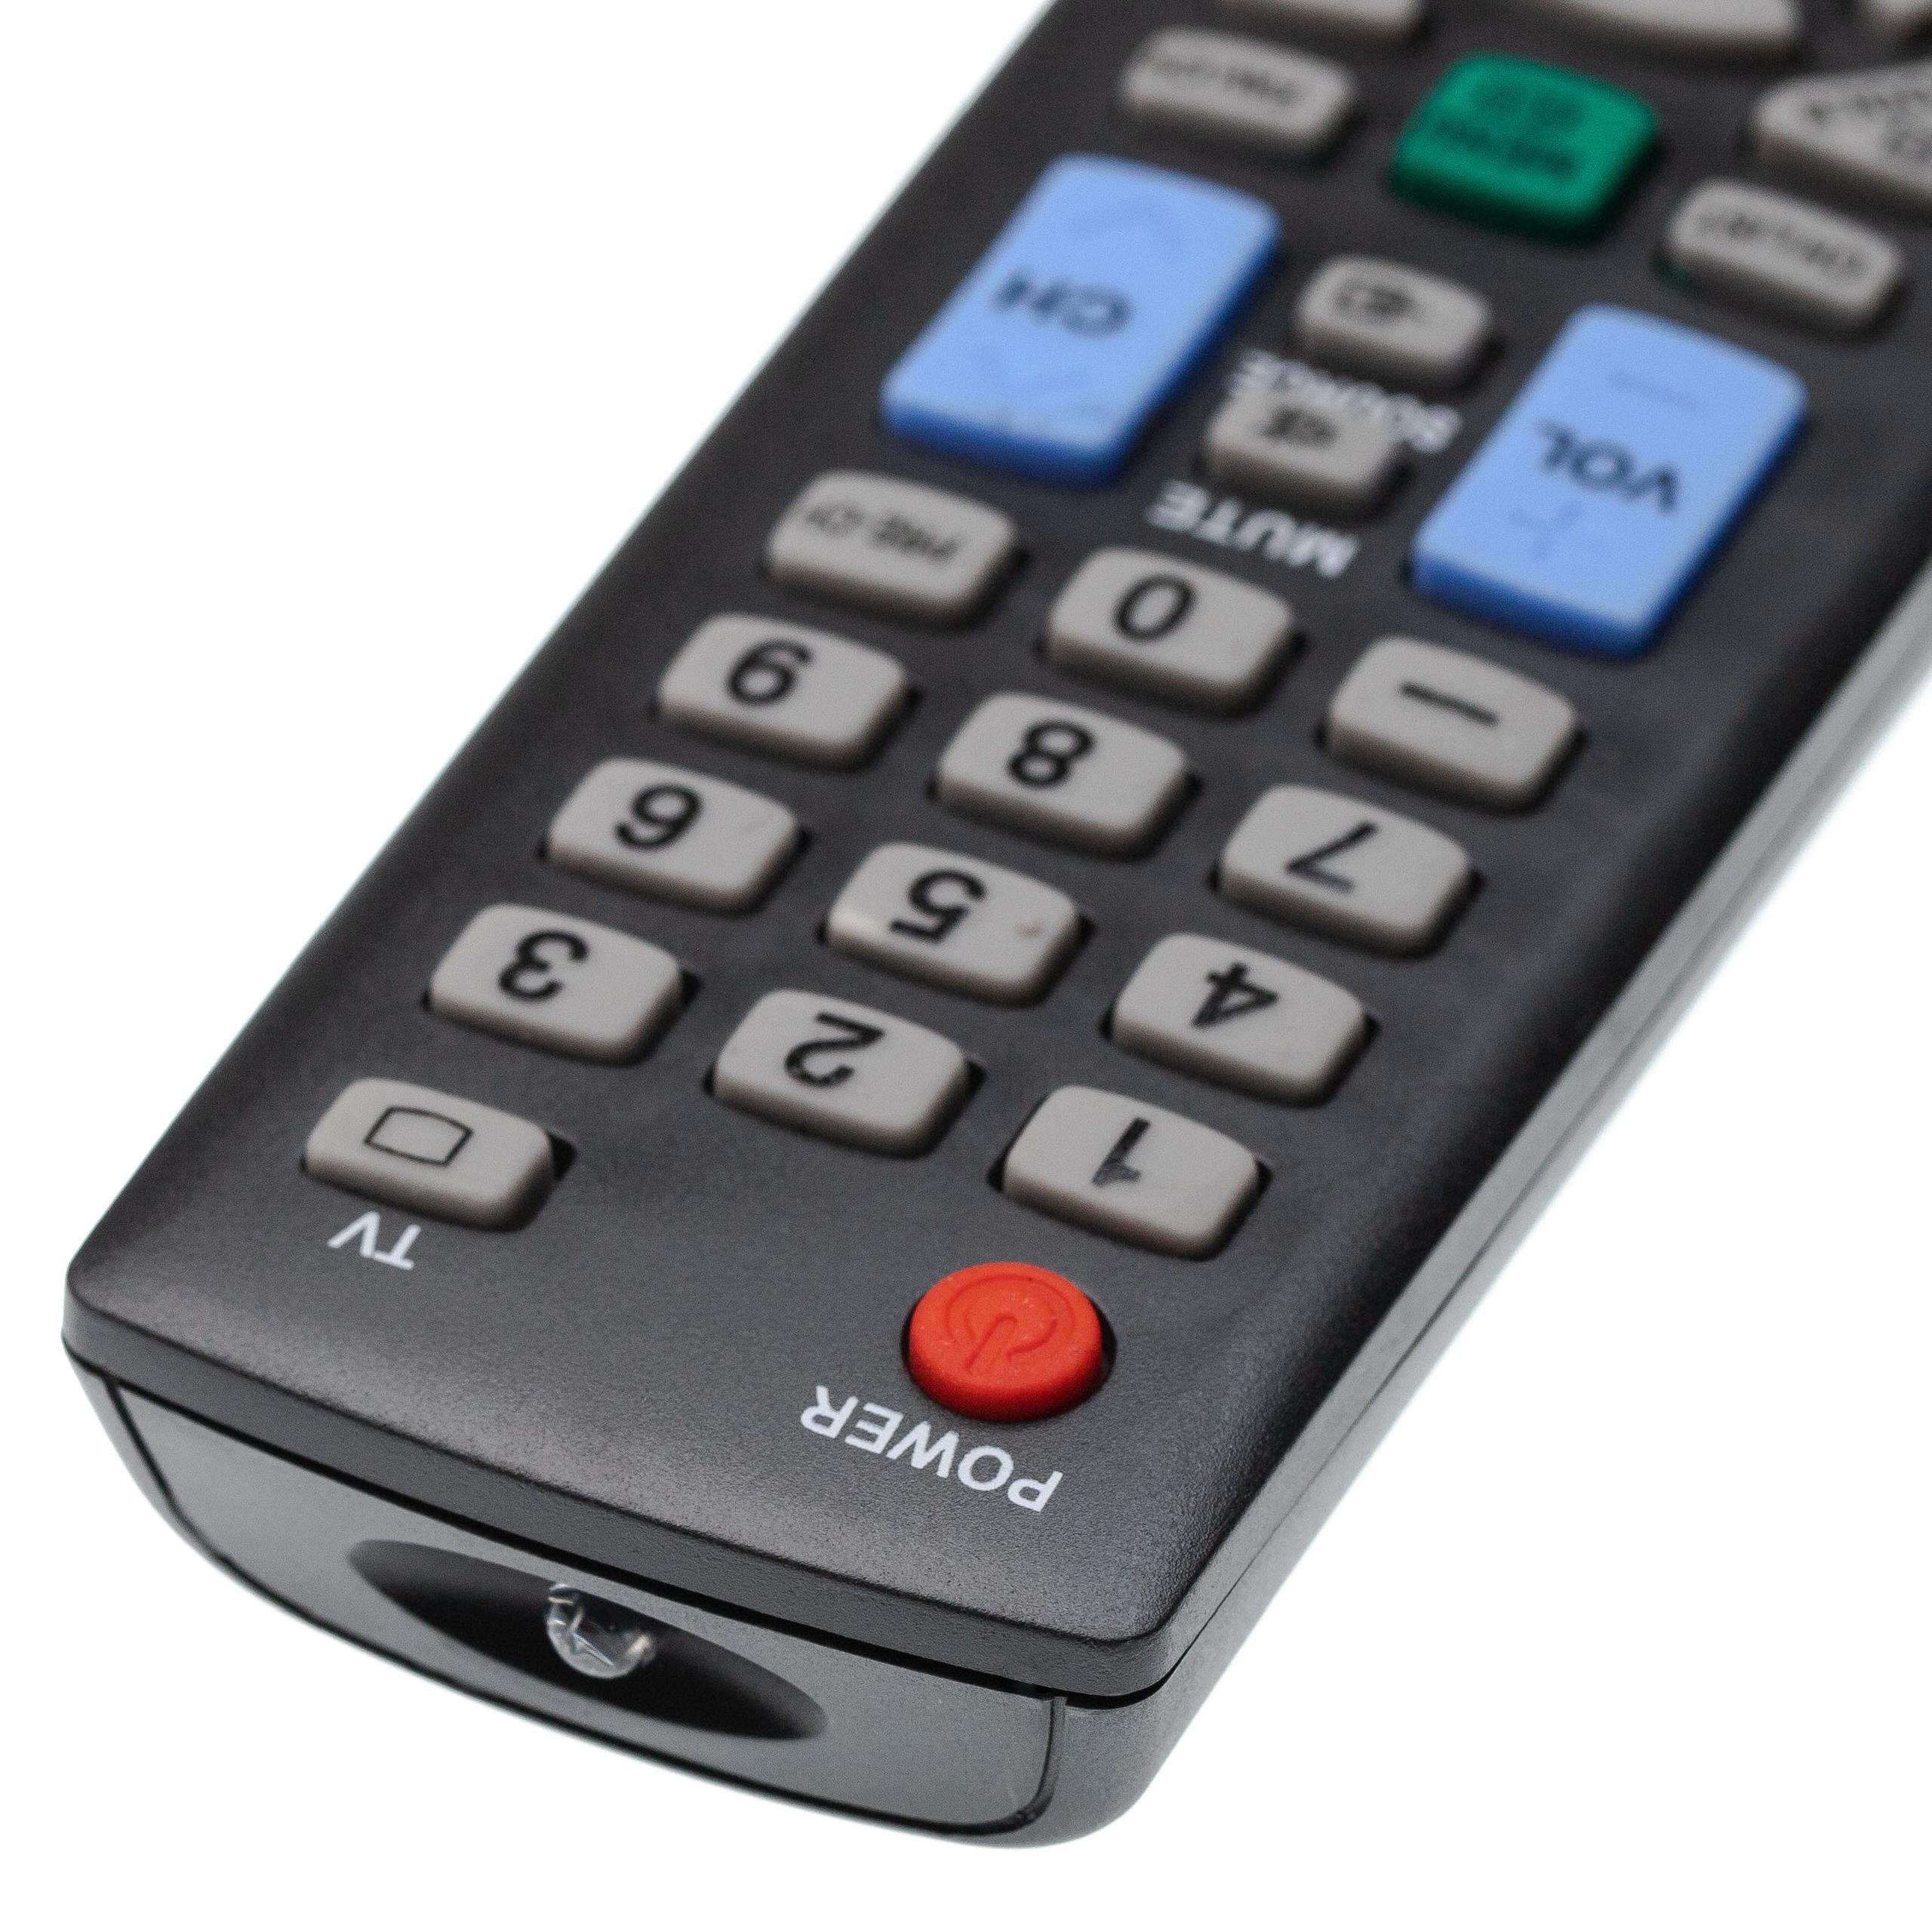 Remote Control replaces Samsung BN59-00857A for Samsung TV